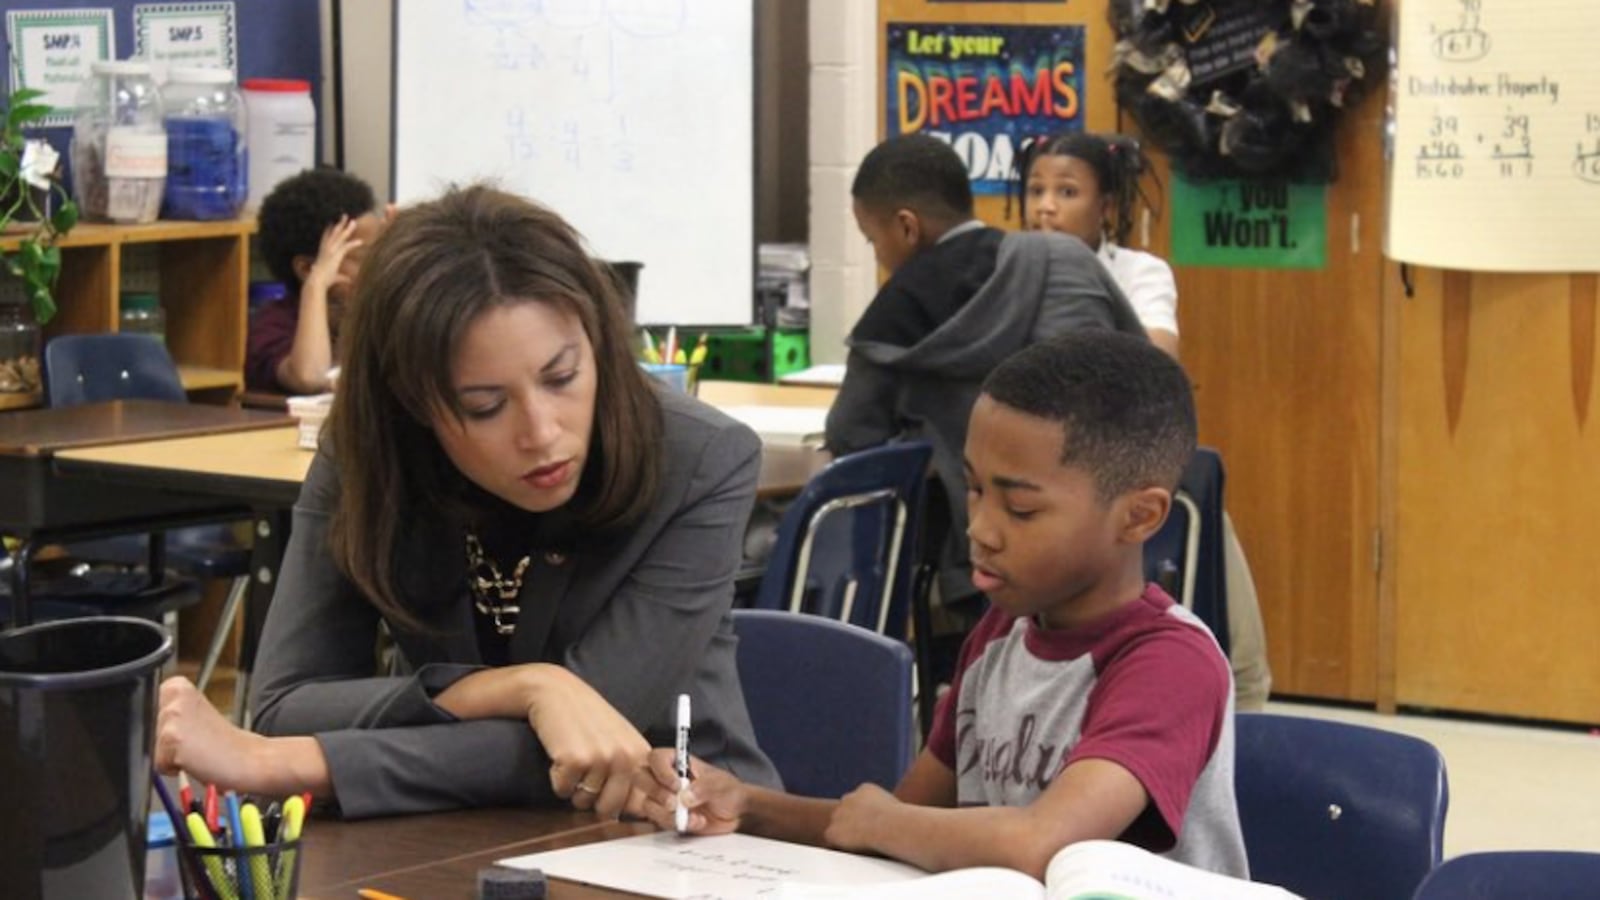 Penny Schwinn looks at classwork with a student in Memphis in February, soon after becoming Tennessee's education commissioner.